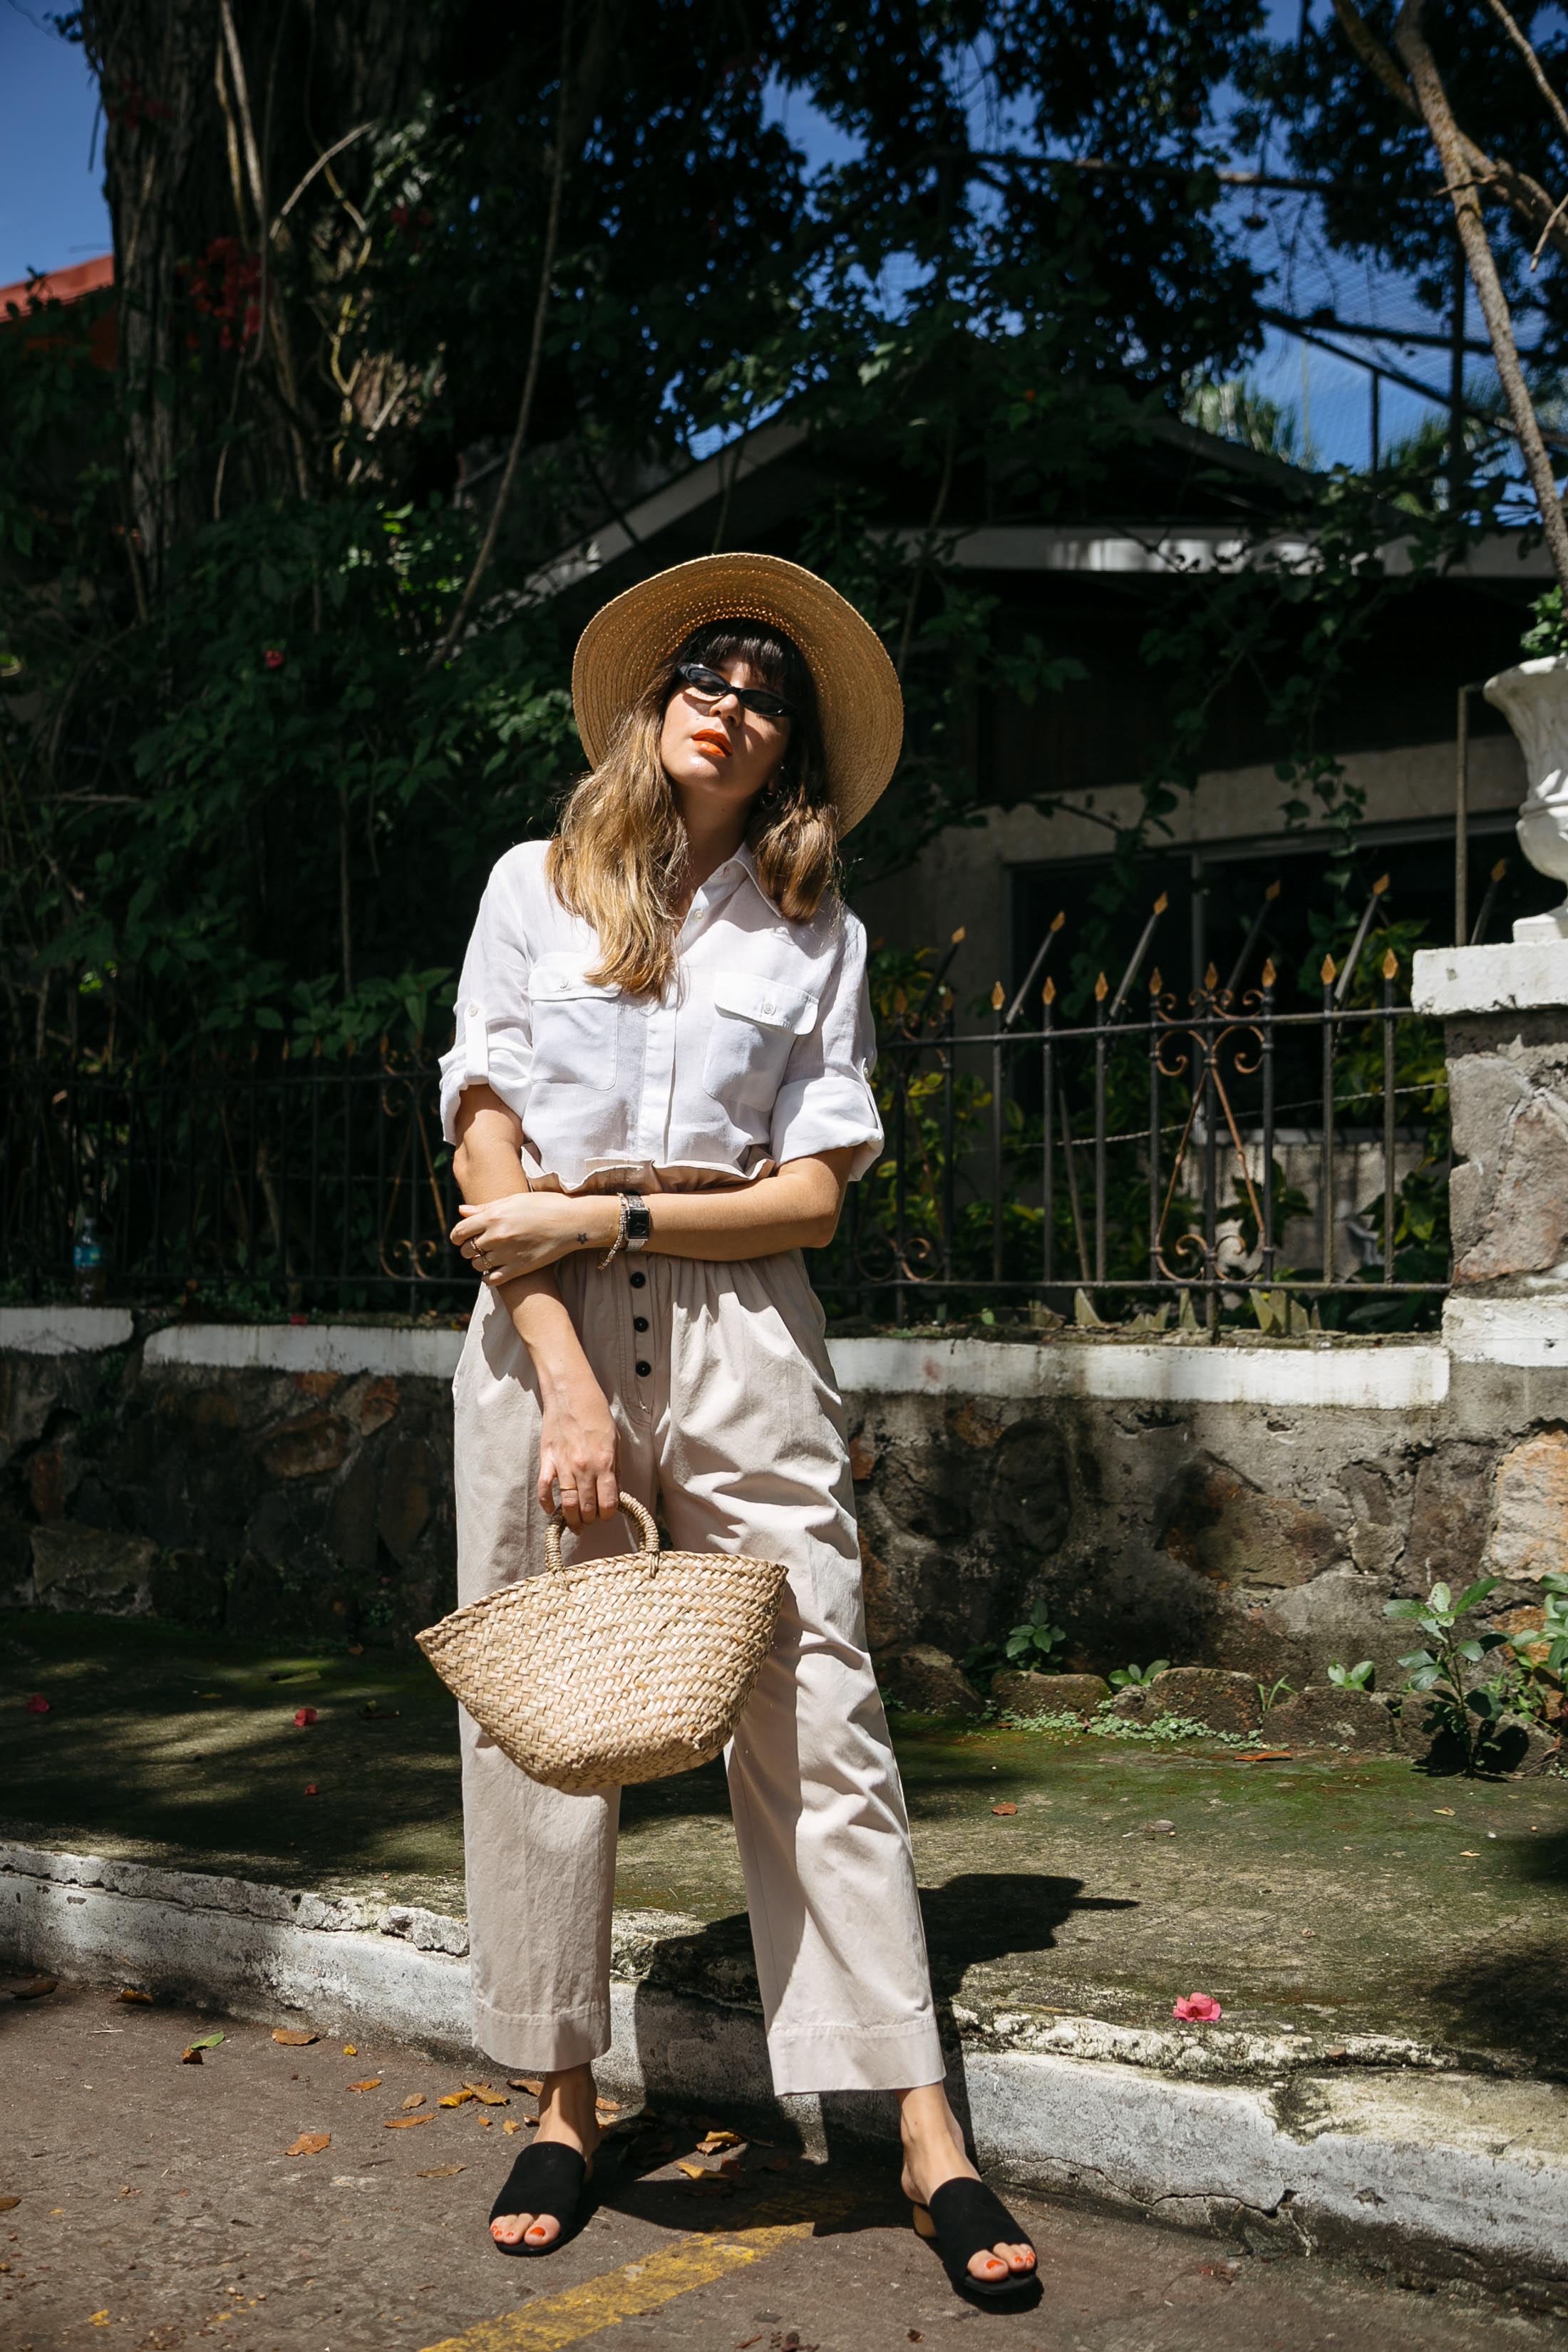 Maristella in a South of France inspired look with a straw hat, white button down shirt and khaki paper bag pants from Mango